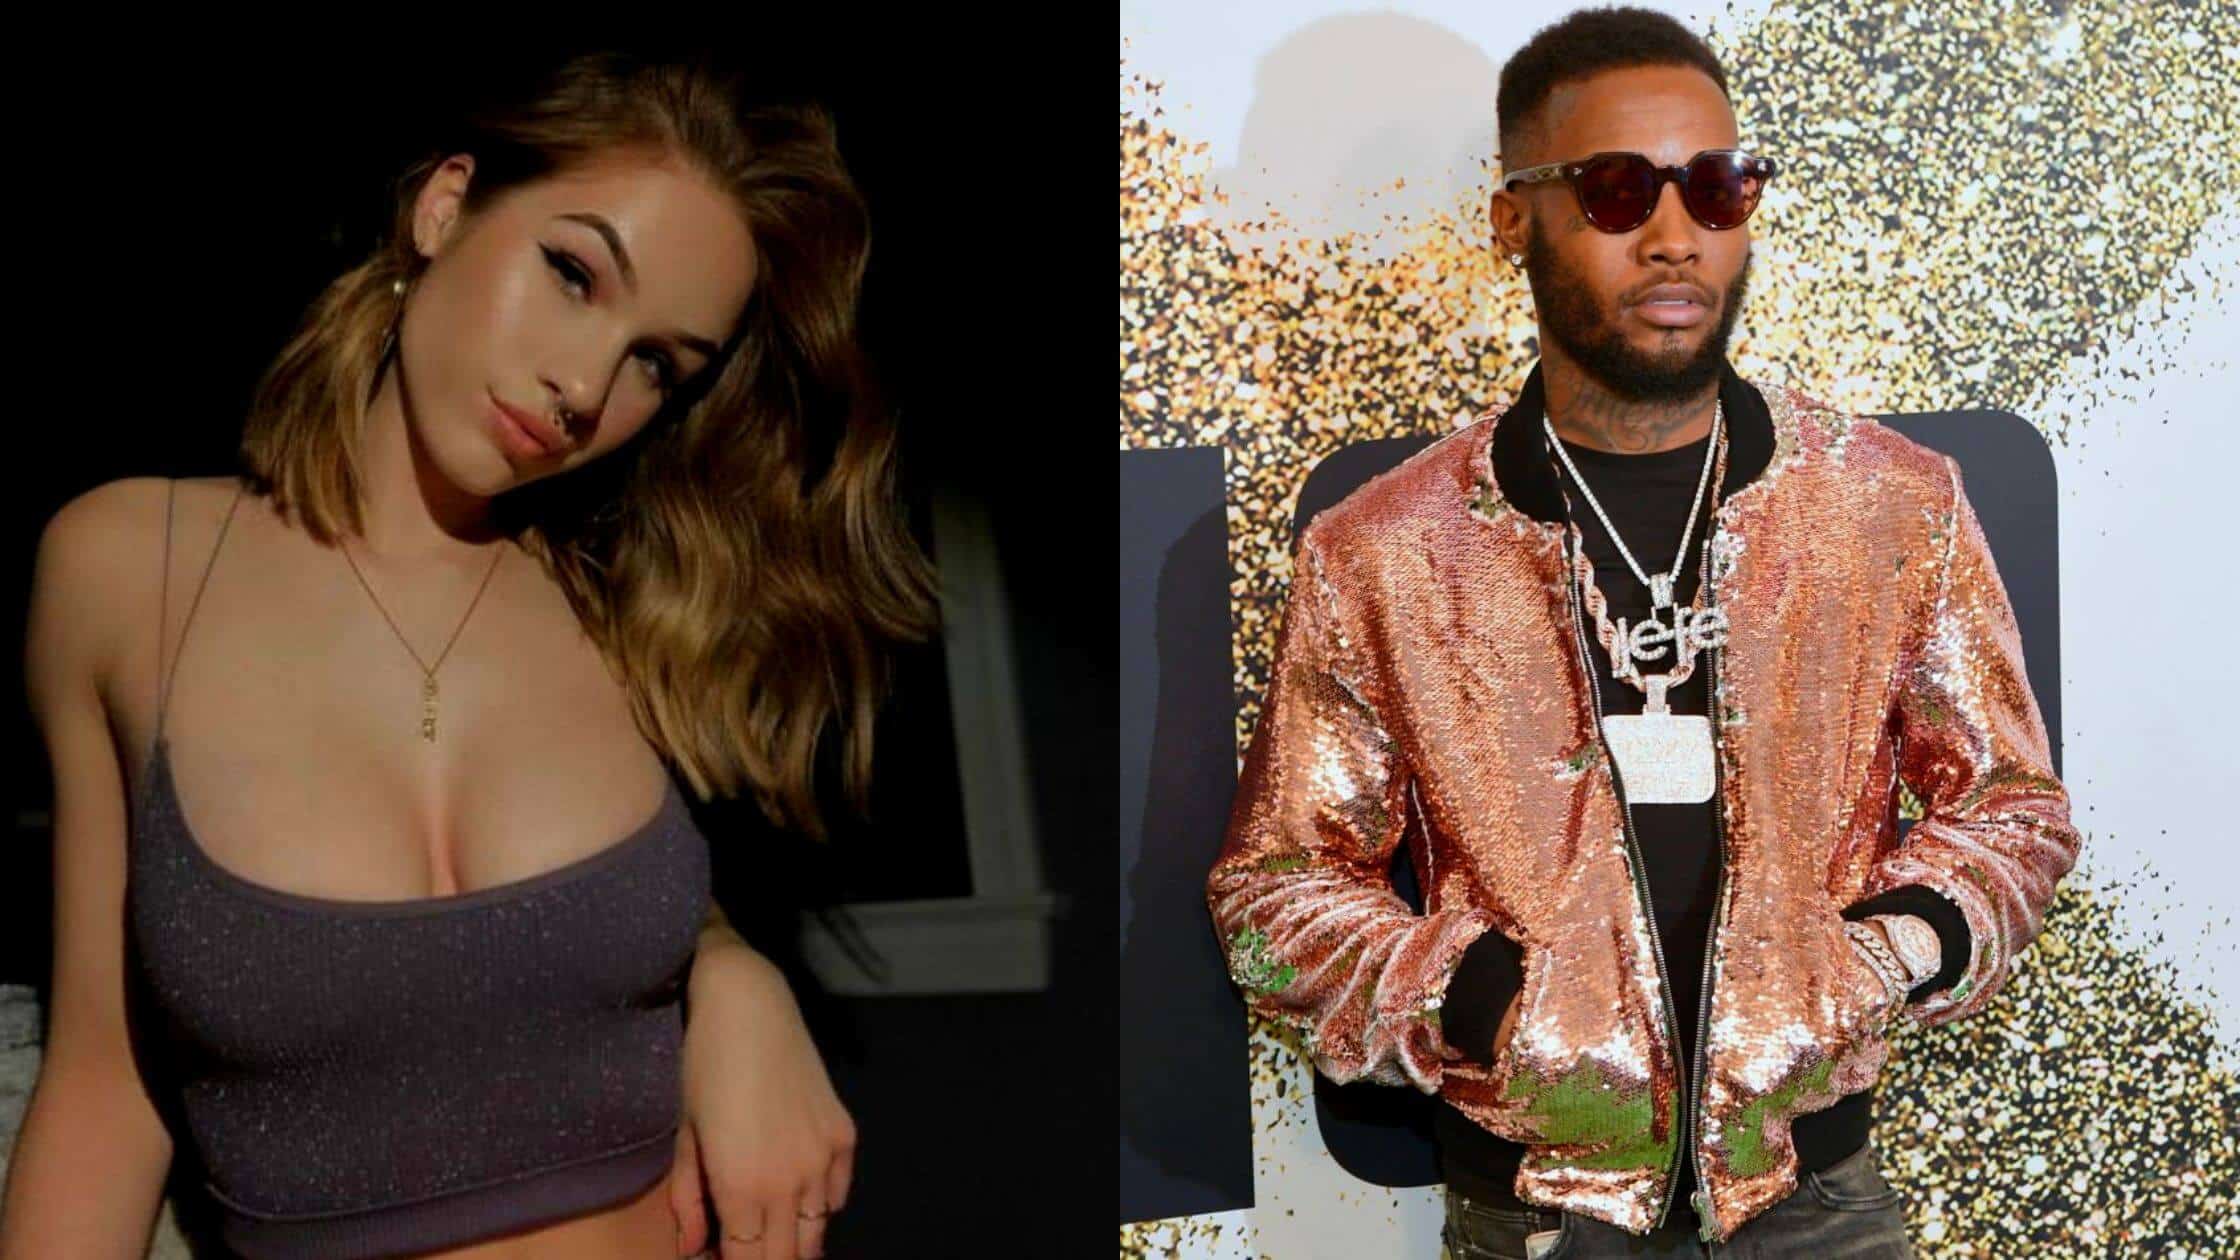 Model Shy Glizzy Alleges Sexual Misconduct During White Girl Video Shoot